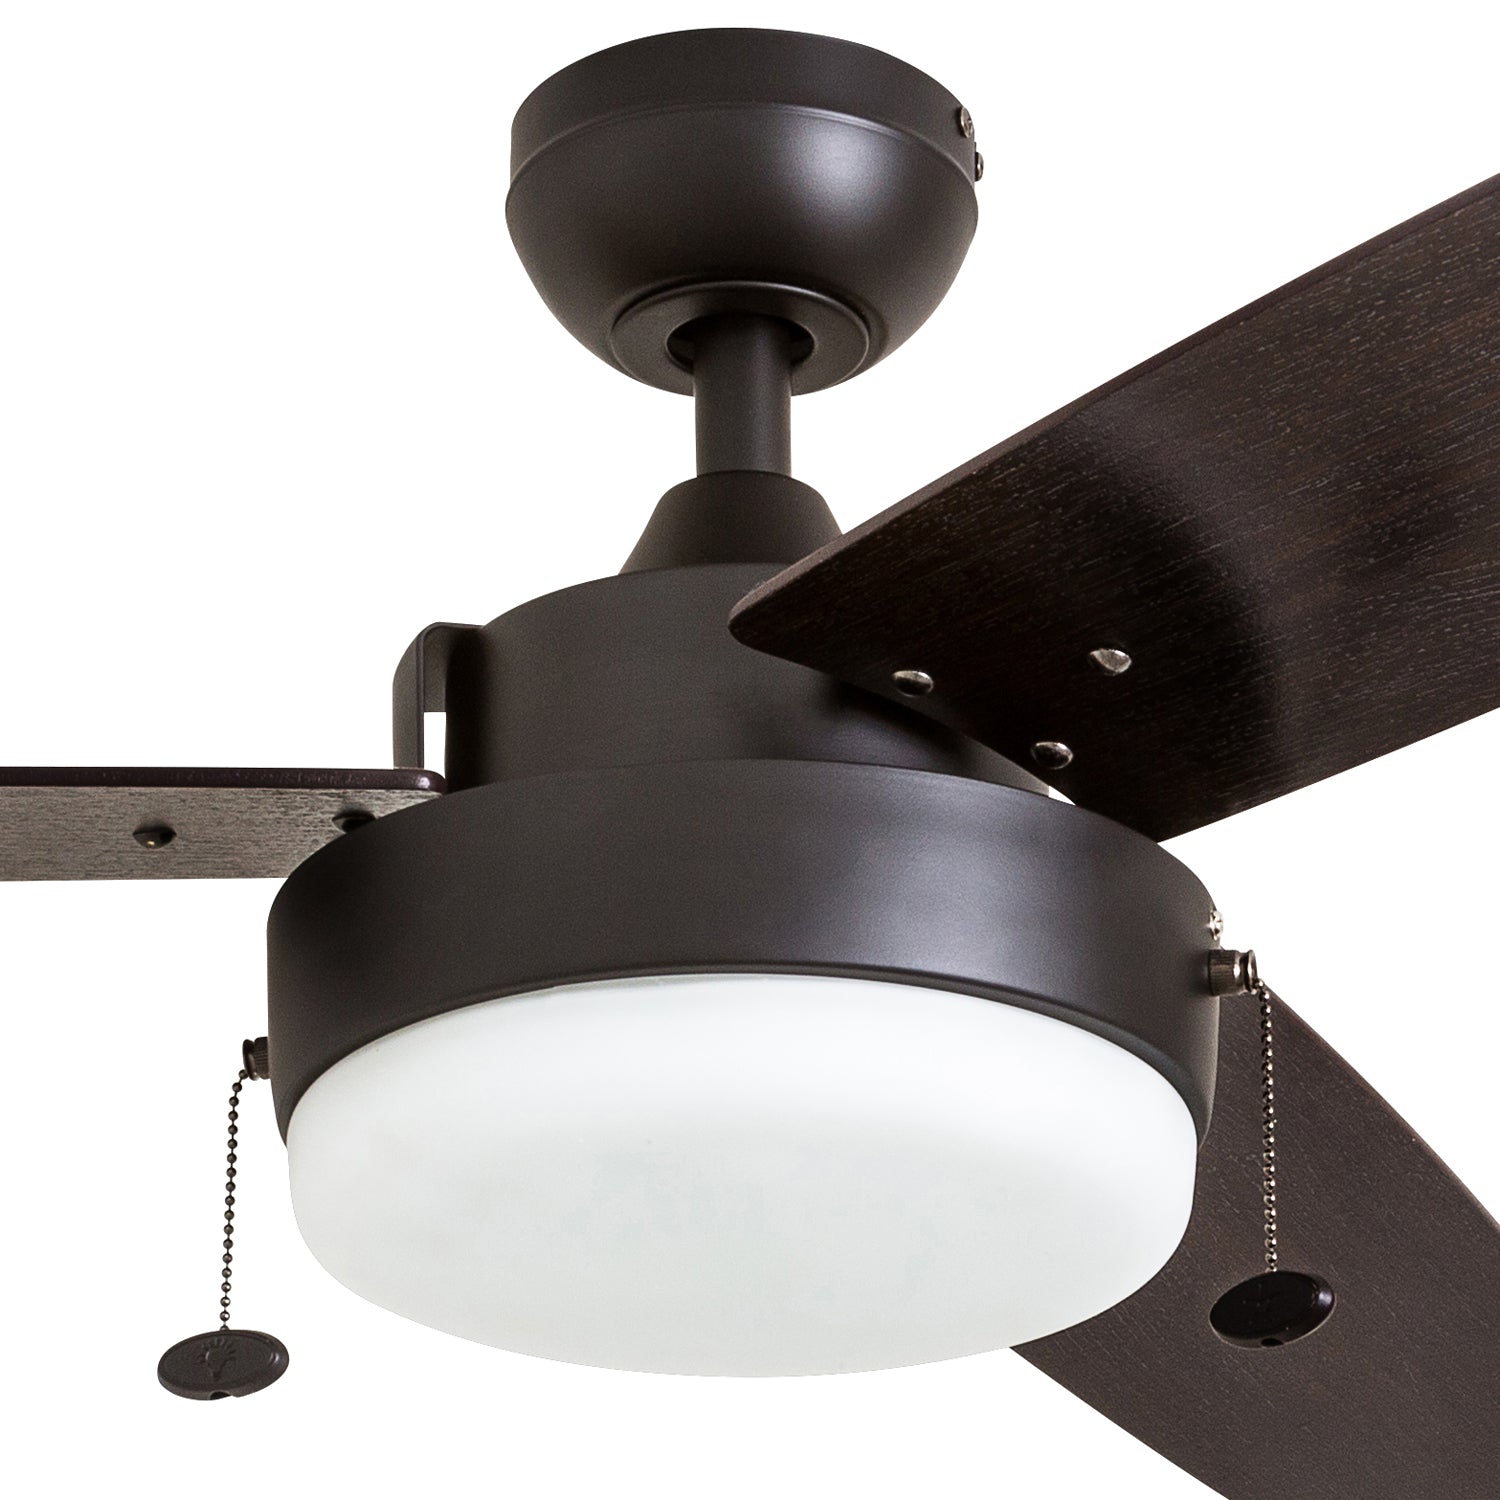 52 Inch Statham, Espresso, Pull Chain, Ceiling Fan by Prominence Home